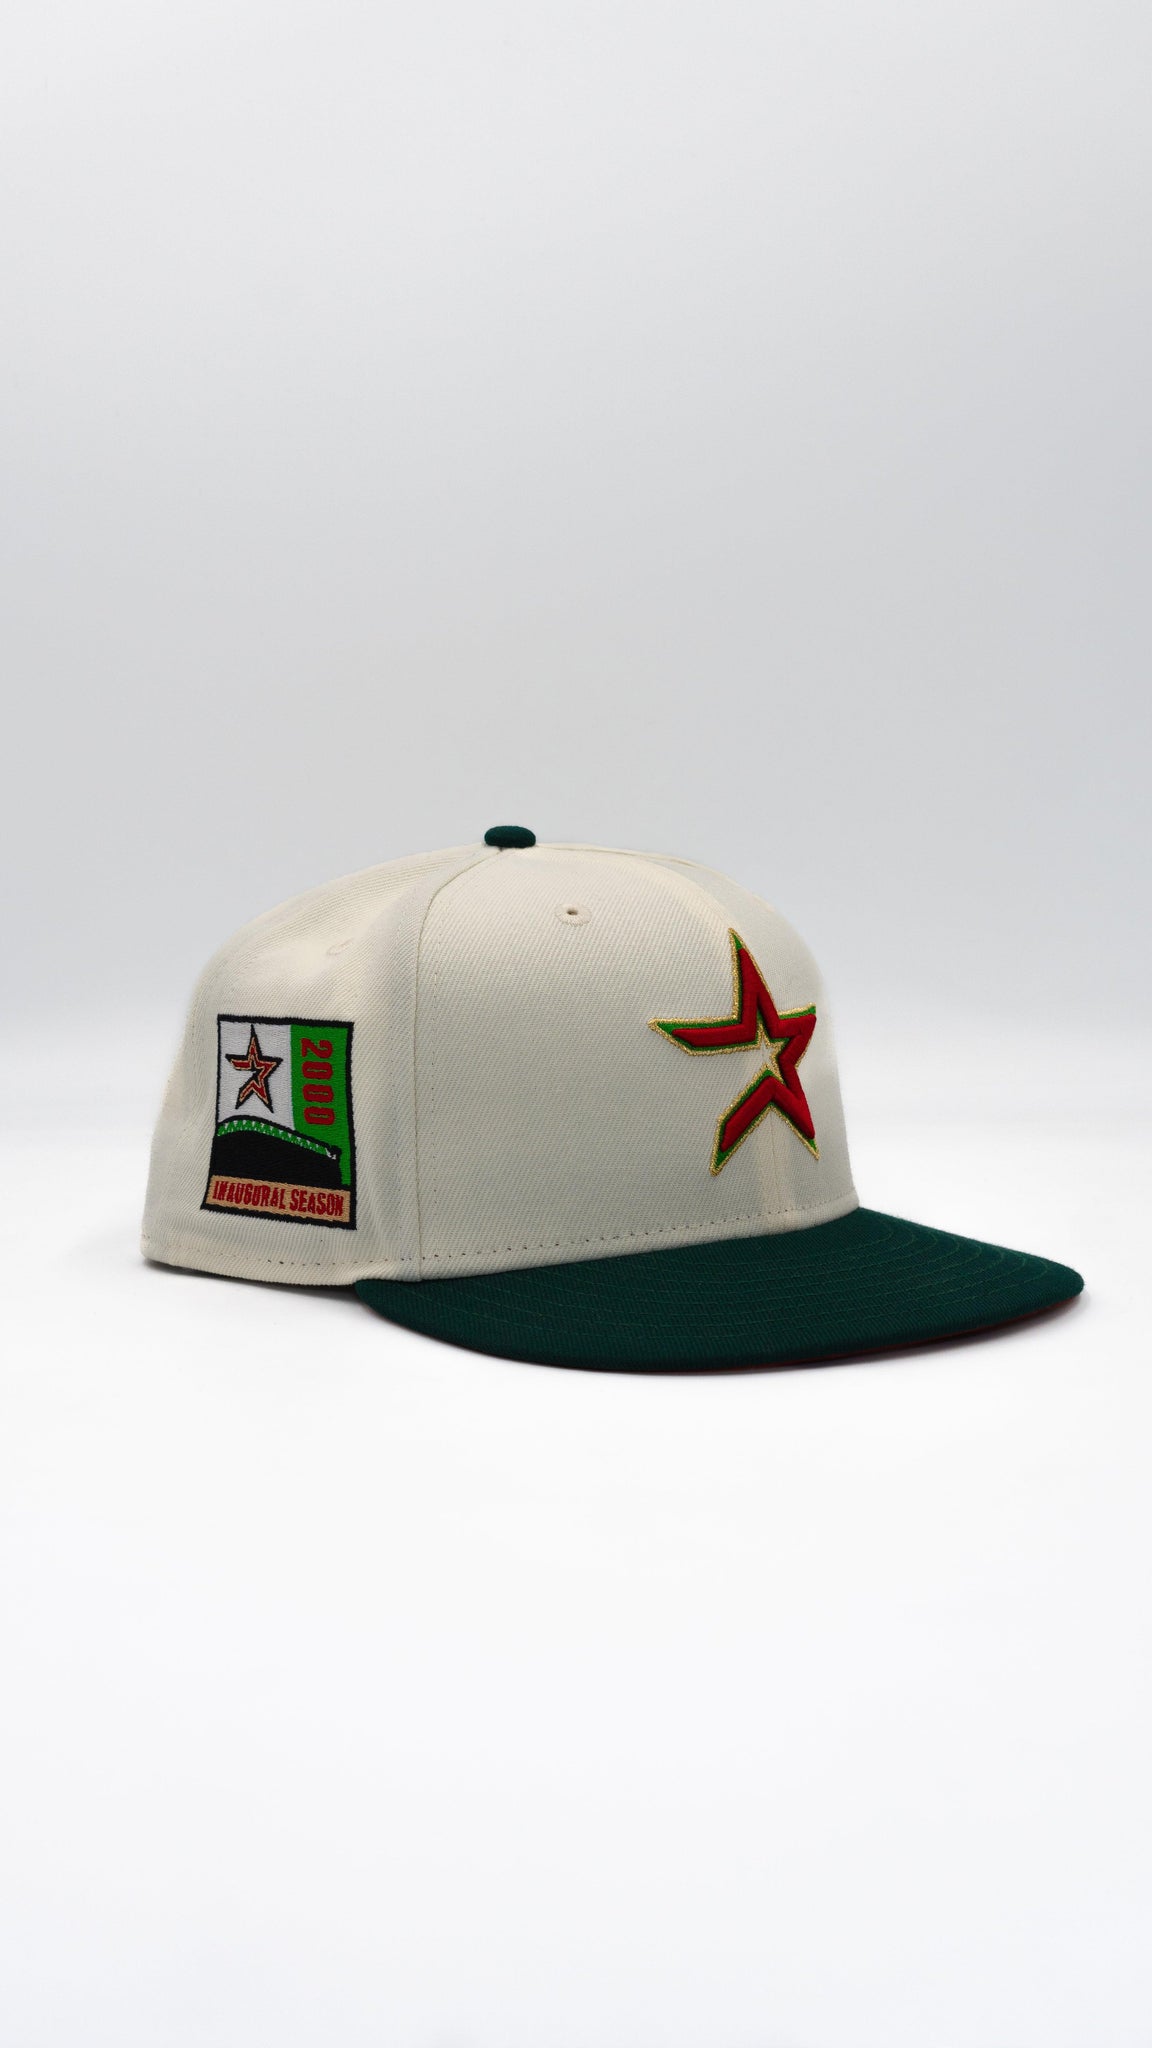 Beisbolmxshop Astros Drop (MX Colorway) comes with 1 exclusive pin or blip